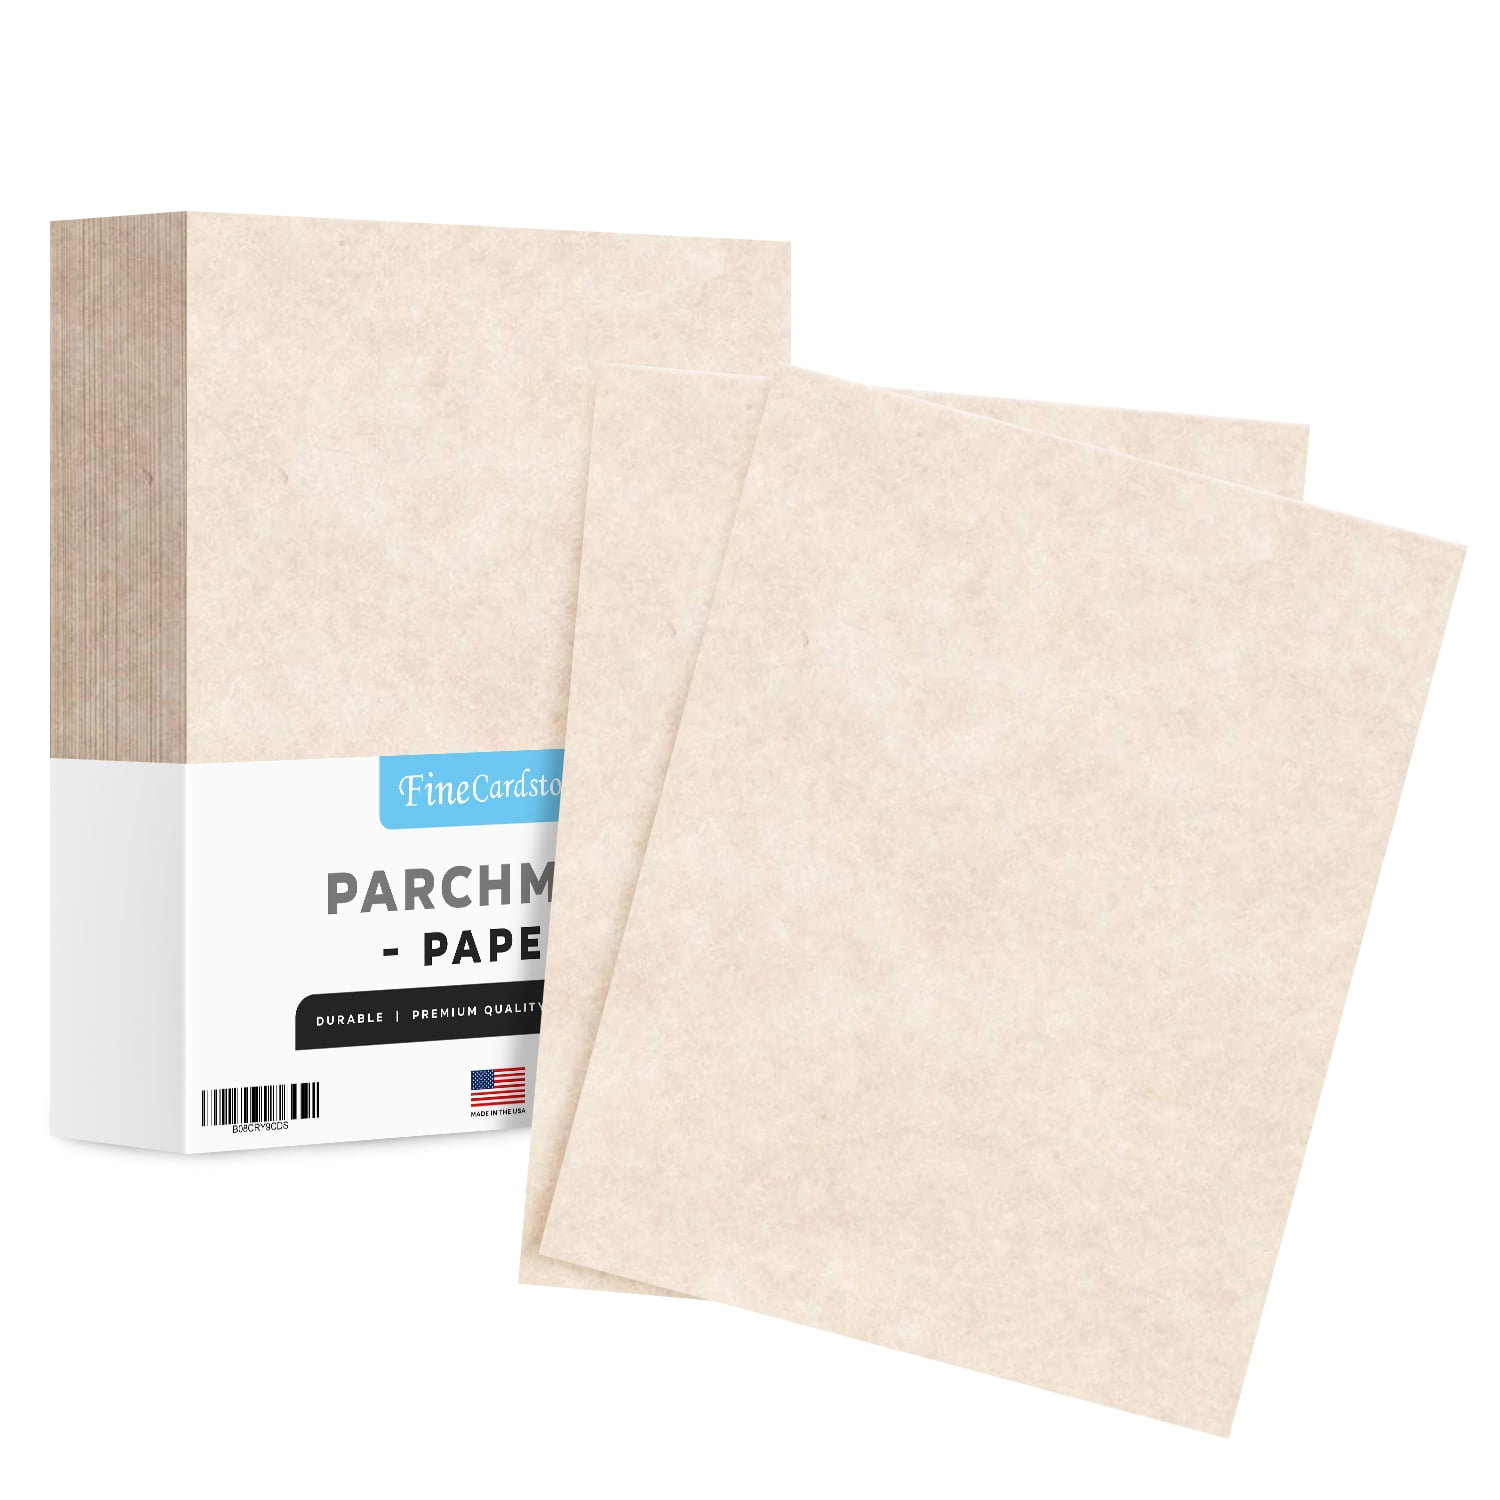 96 Sheets Parchment Paper for Certificates, Resumes, Diplomas, 90 GSM  Textured Stationary, Printer-Friendly (Ivory, 8.5 x 11 In)